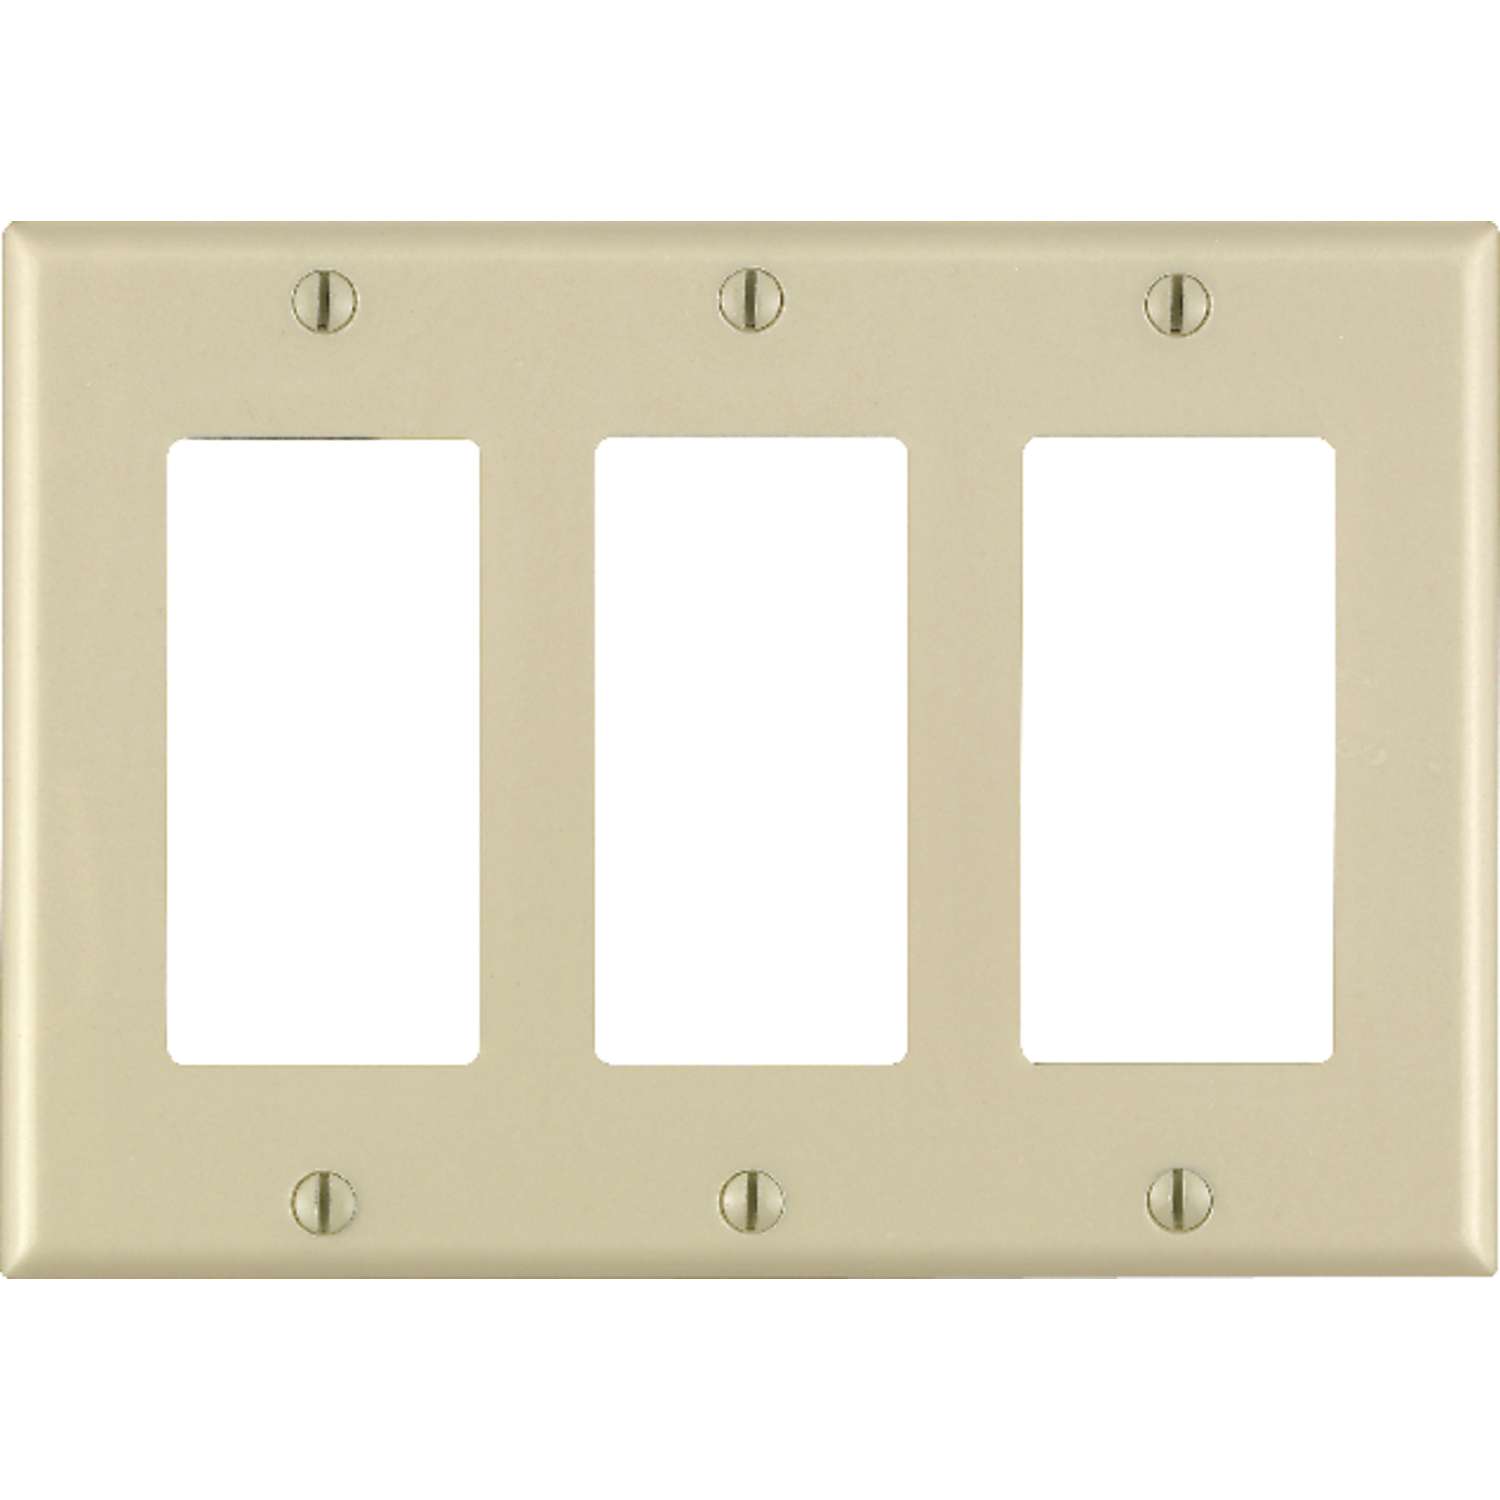 Vintage Uniline Ivory Leviton Decora GFCI Switch Outlet Cover Plate Ribbed 